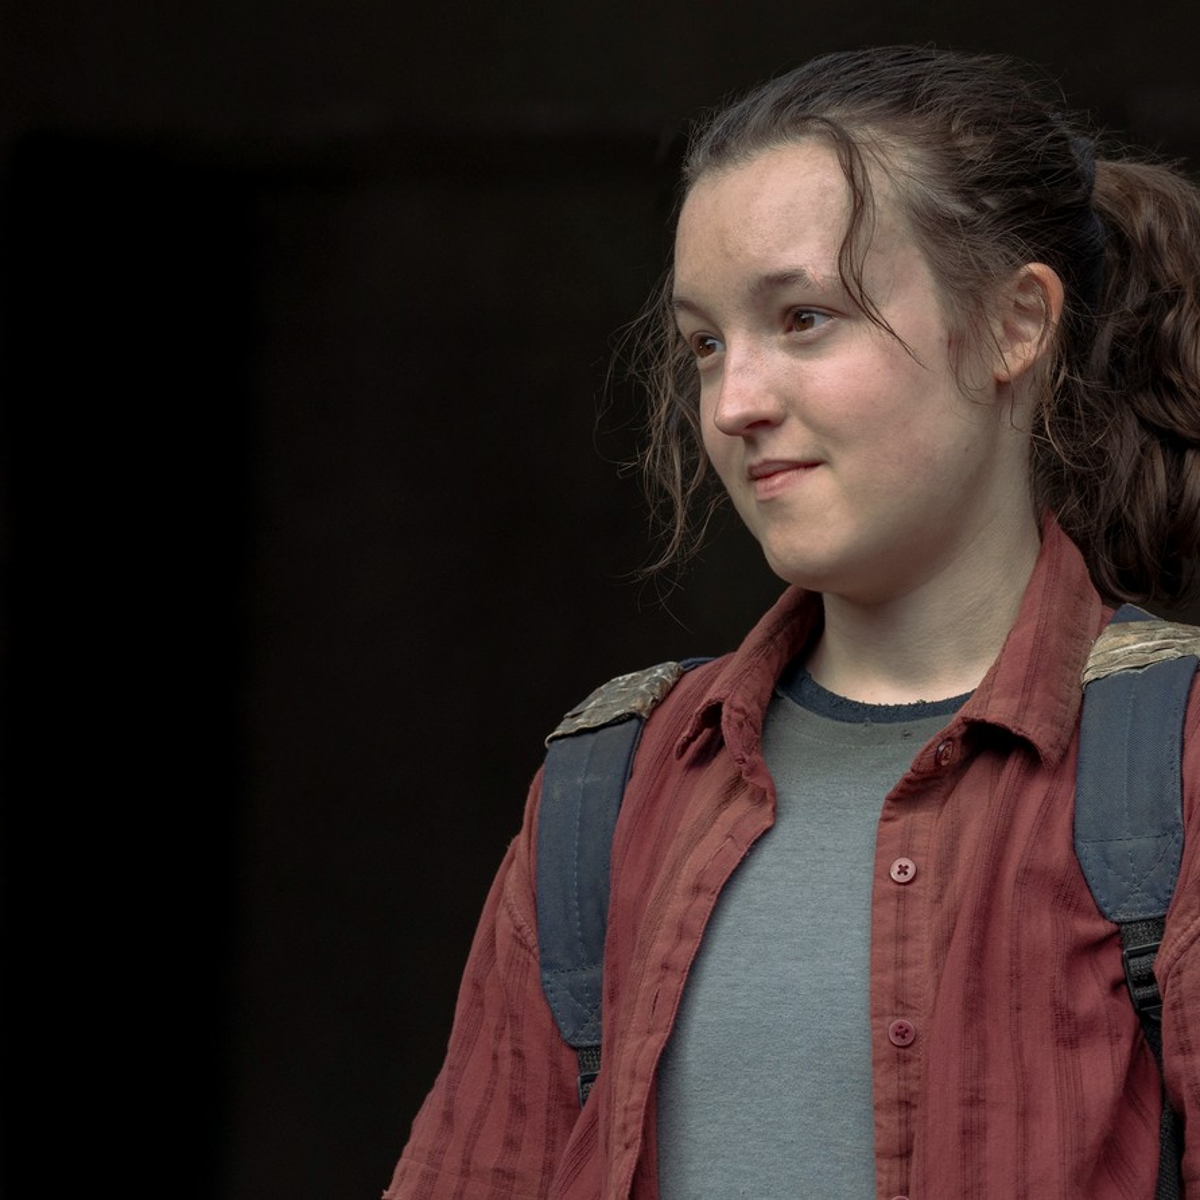 The Last Of Us viewers spot Abby in season finale